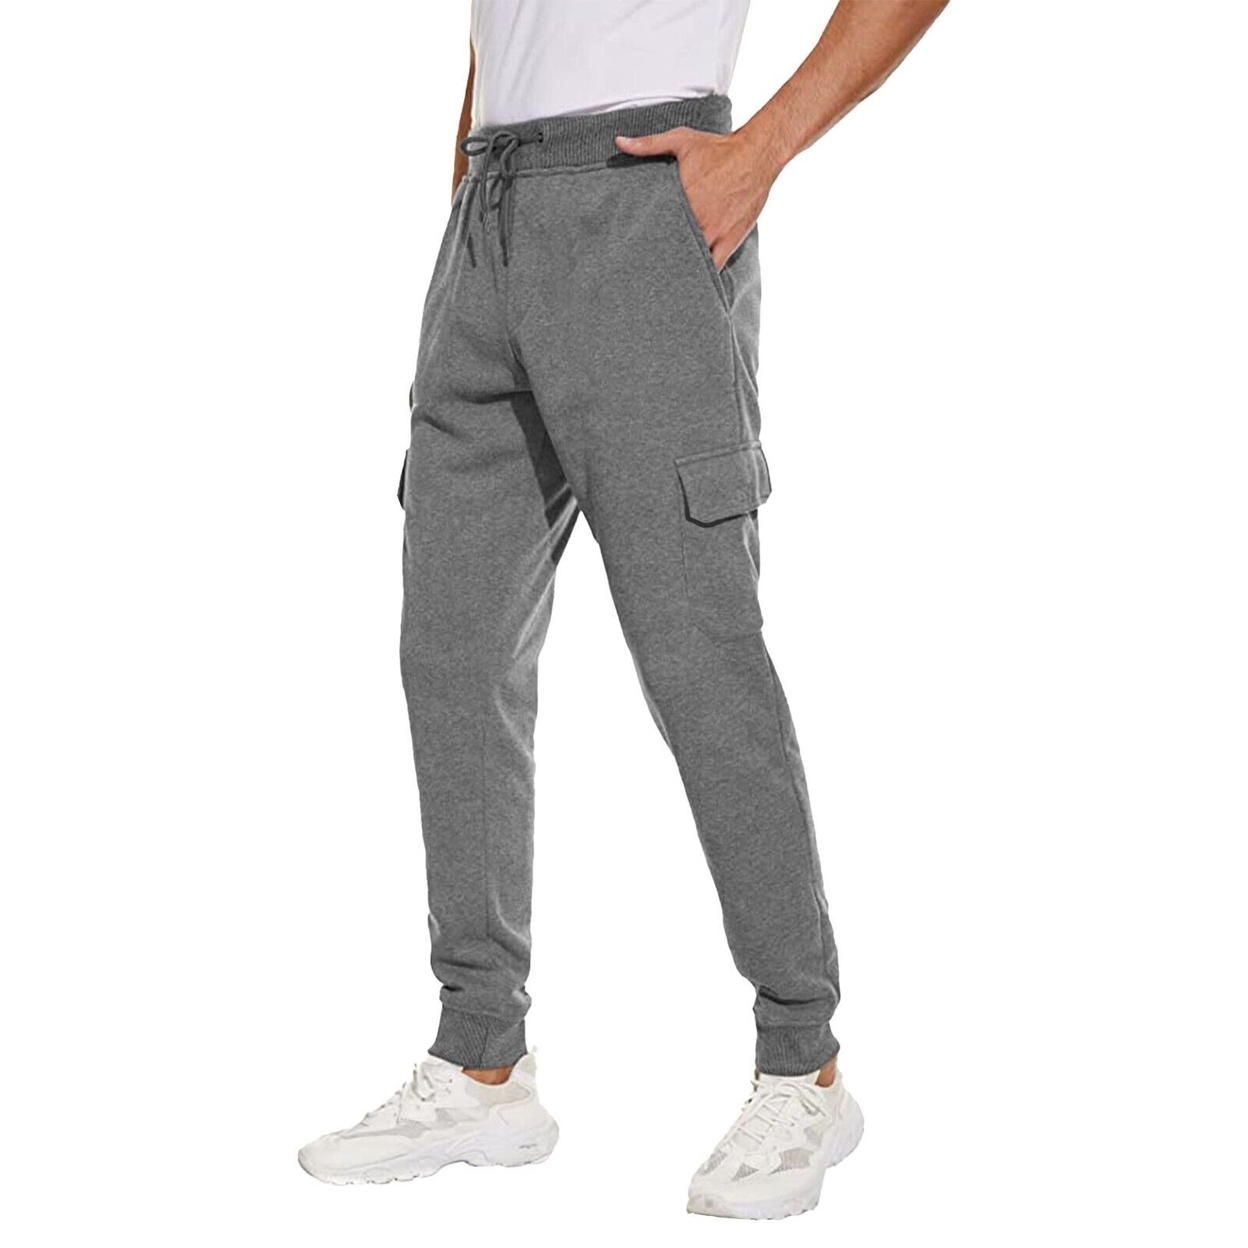 Men's Ultra Soft Winter Warm Thick Sweat Pant Athletic Sherpa Lined Jogger Pants - Grey, 3xl